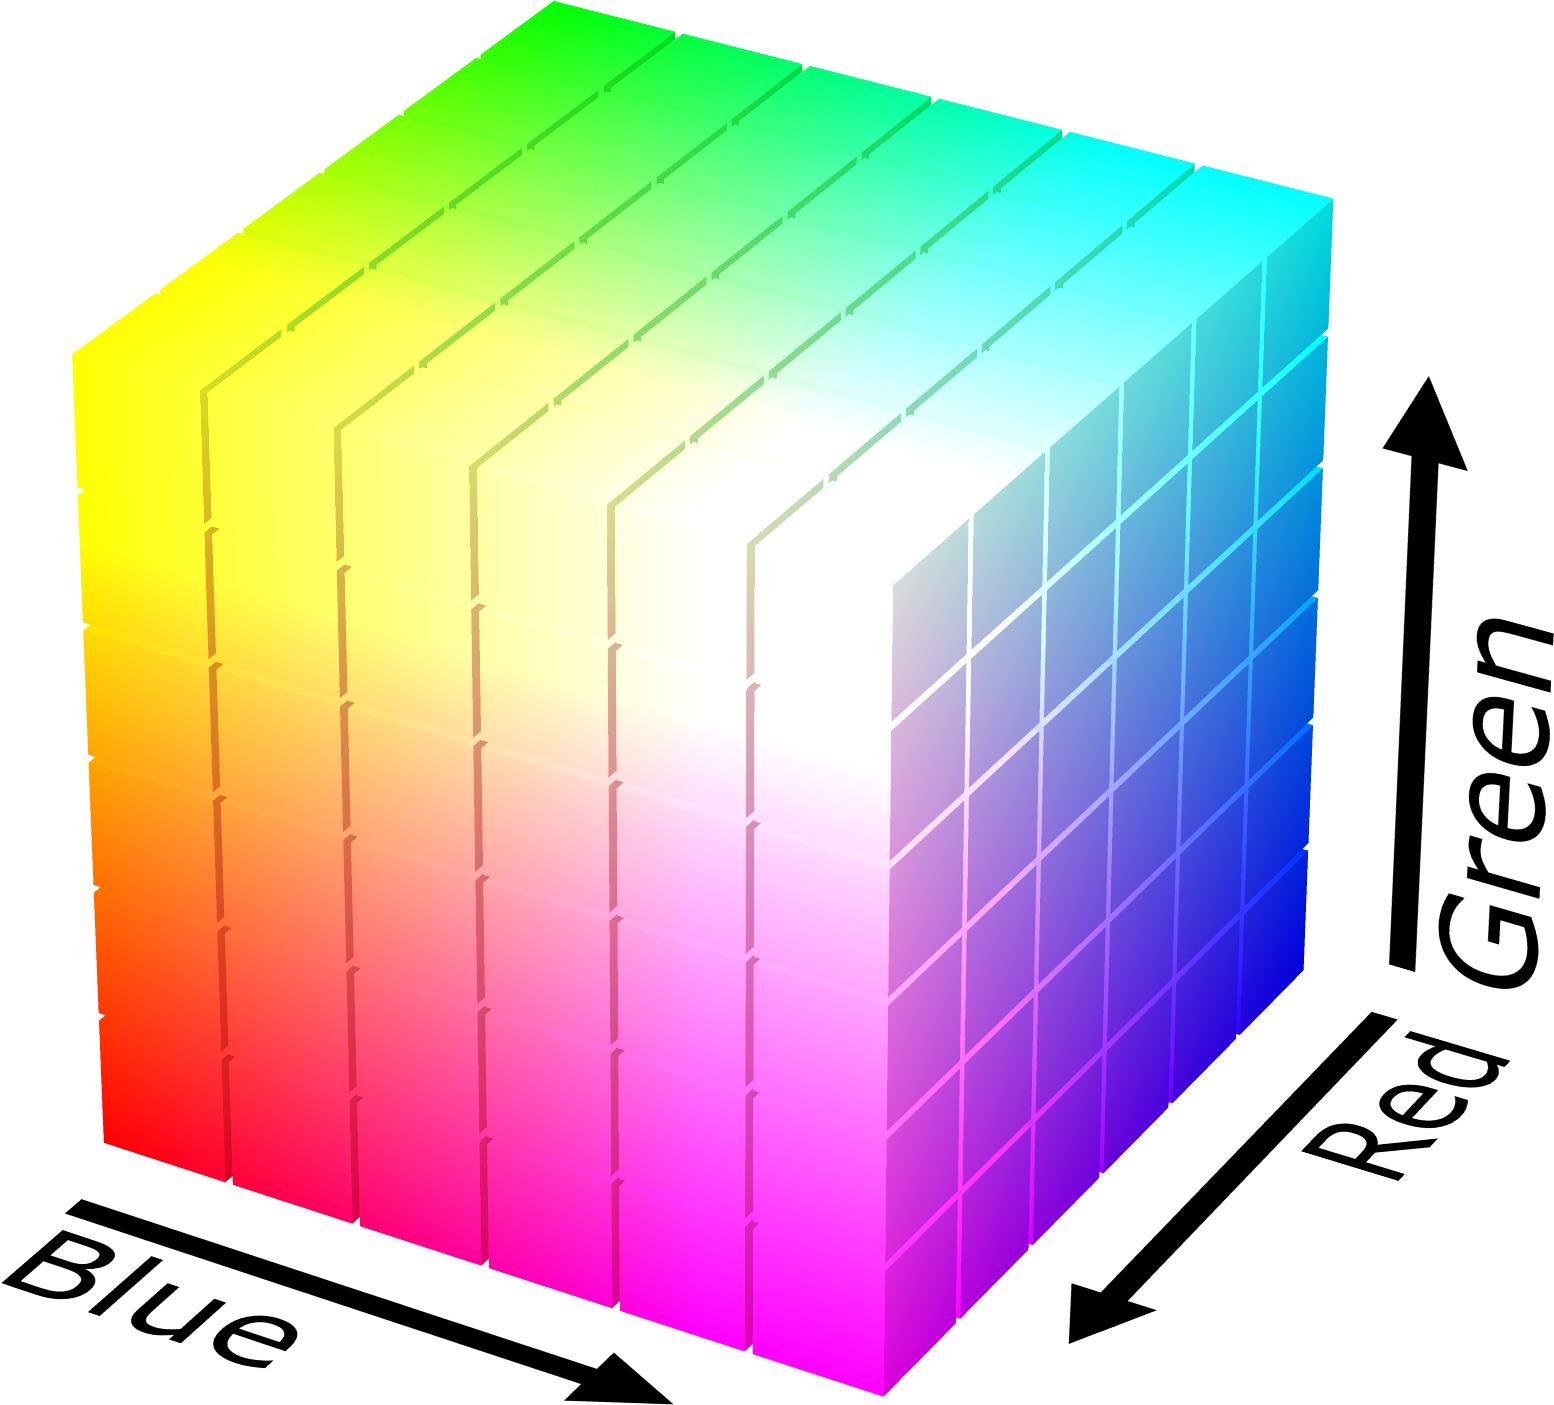 Or Do We Alas, This Cube Is A Fake Looking Back To - Rgb Color Model (2400x1800)